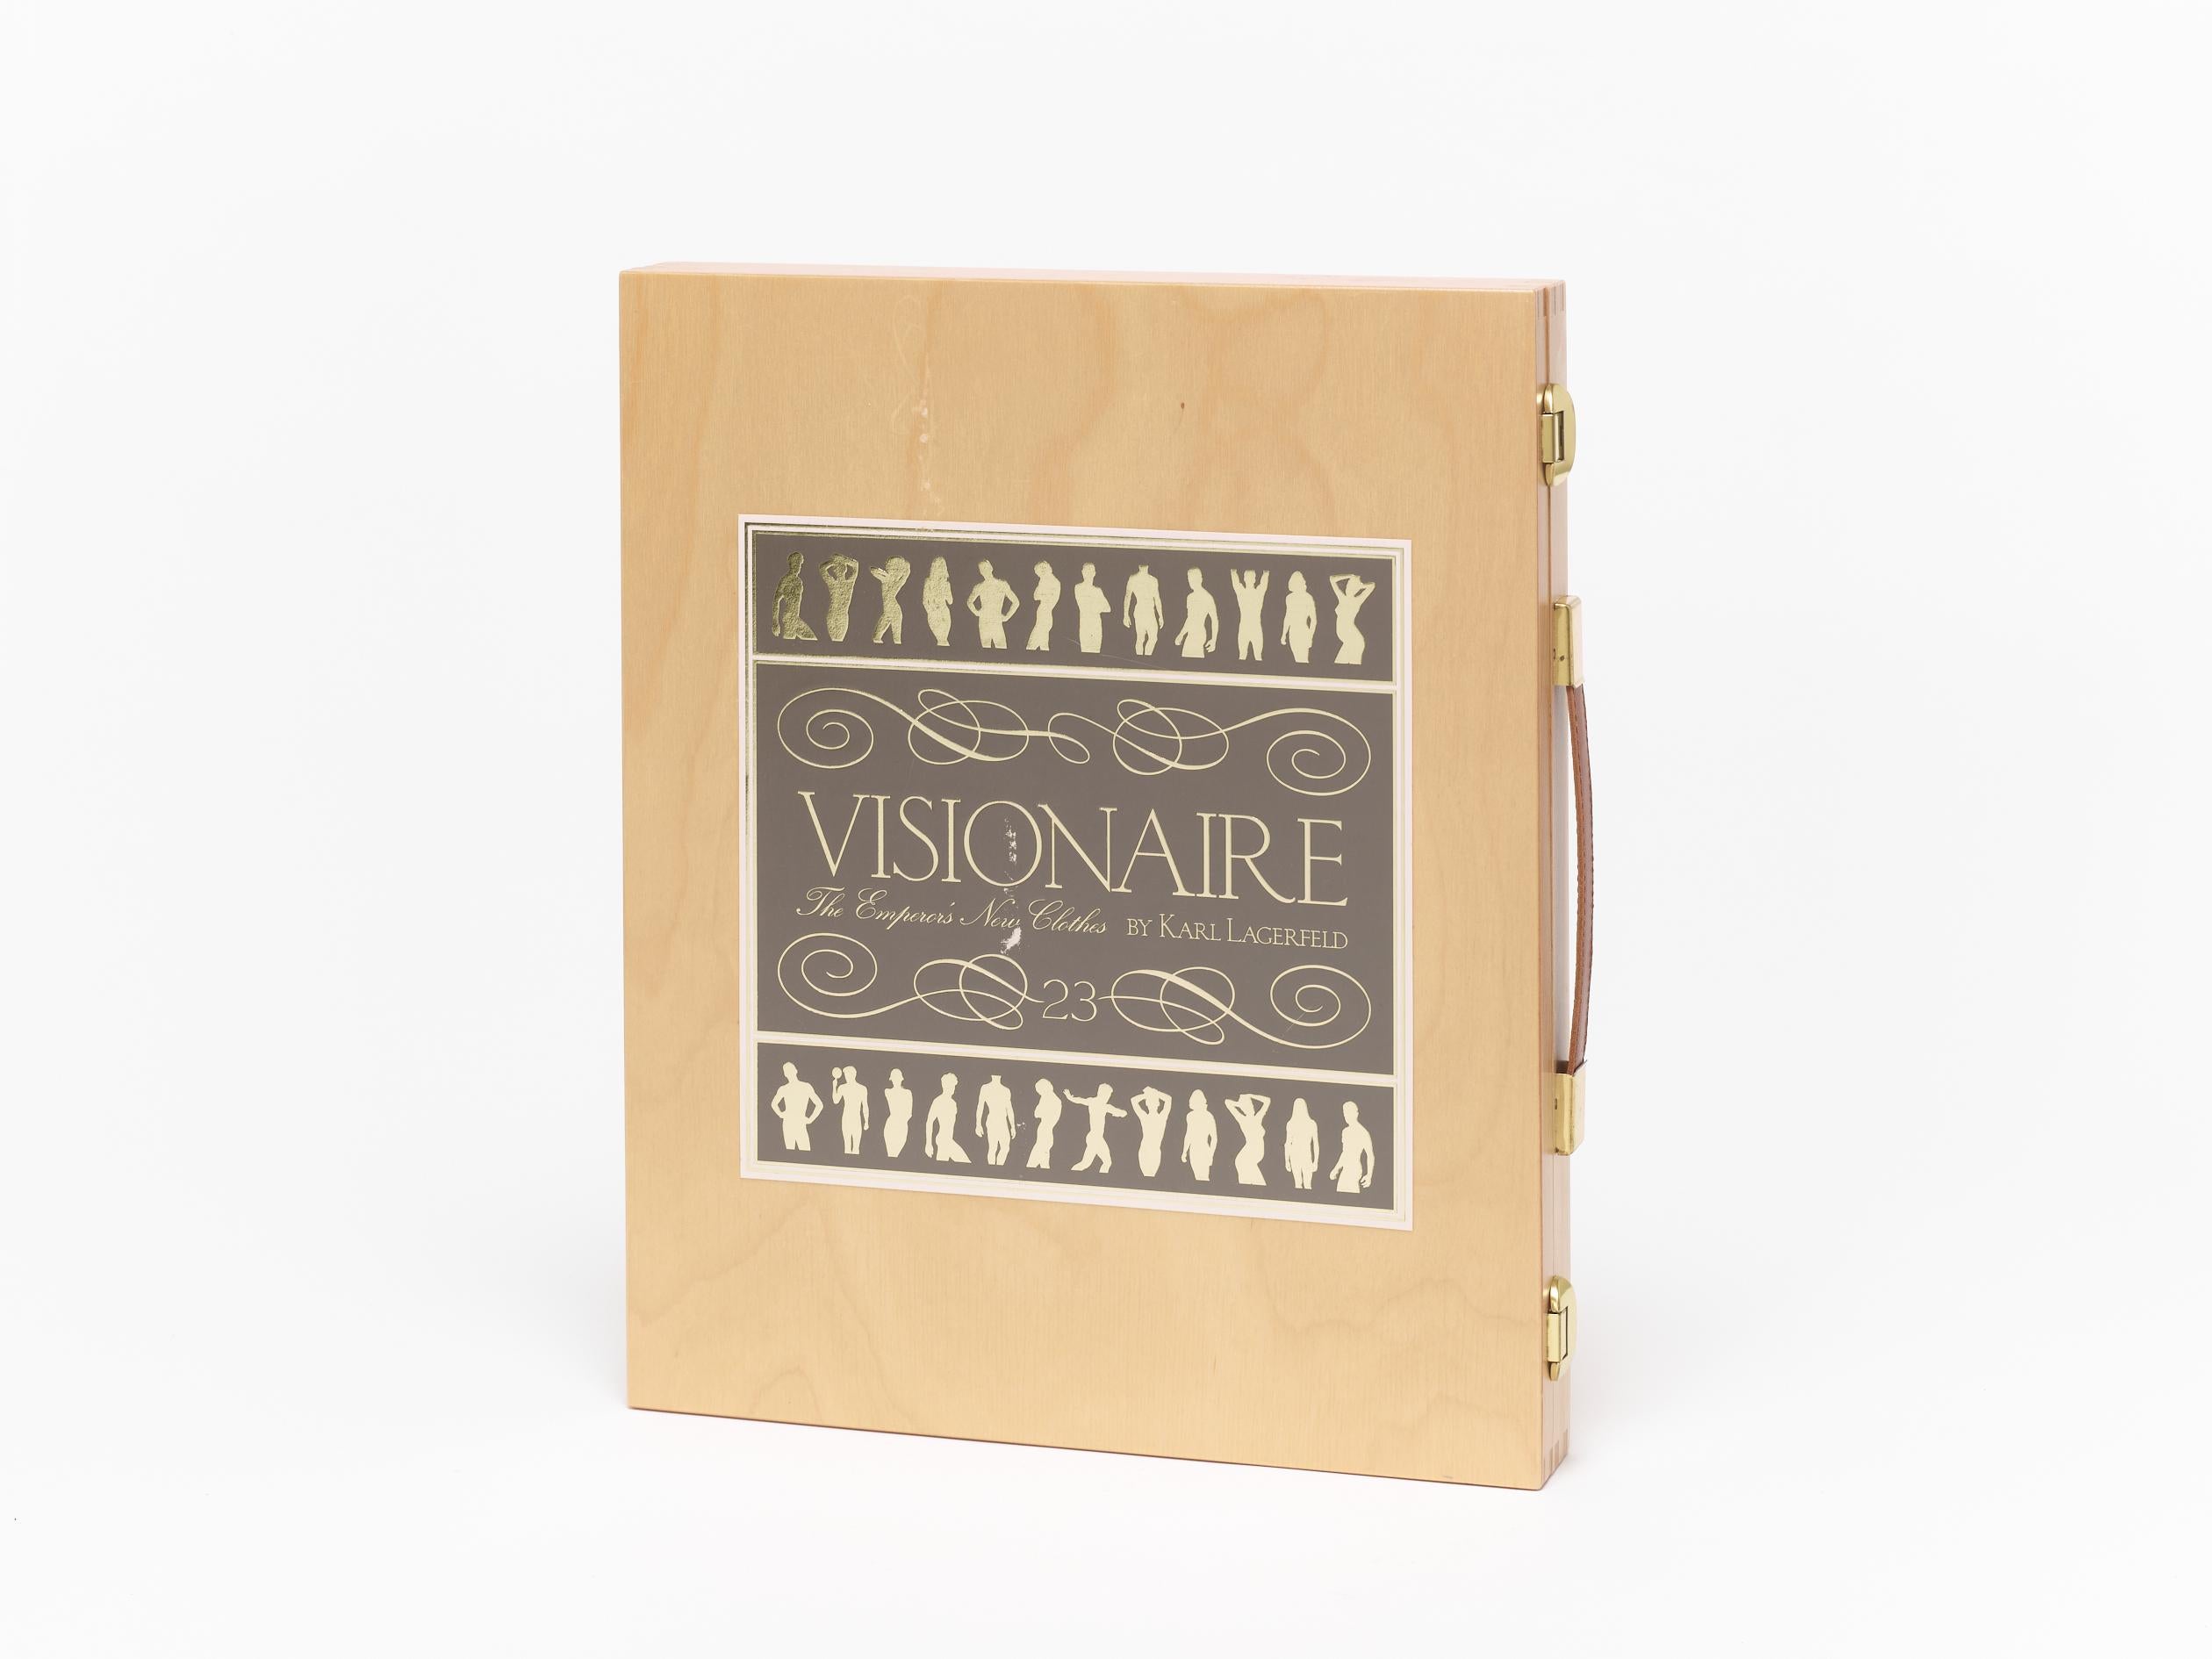 KARL LAGERFELD ( 1933 -2019 )

Visionnaire# 23 The Emperor's new Clothes ( 1997 ) .
numbered of 5000 editions .
Magazine / Art portfolio / 1st edition .
36 x 29 cm . 
Fashion designer KARL LAGERFELD picked up his camera for Visionnaire and